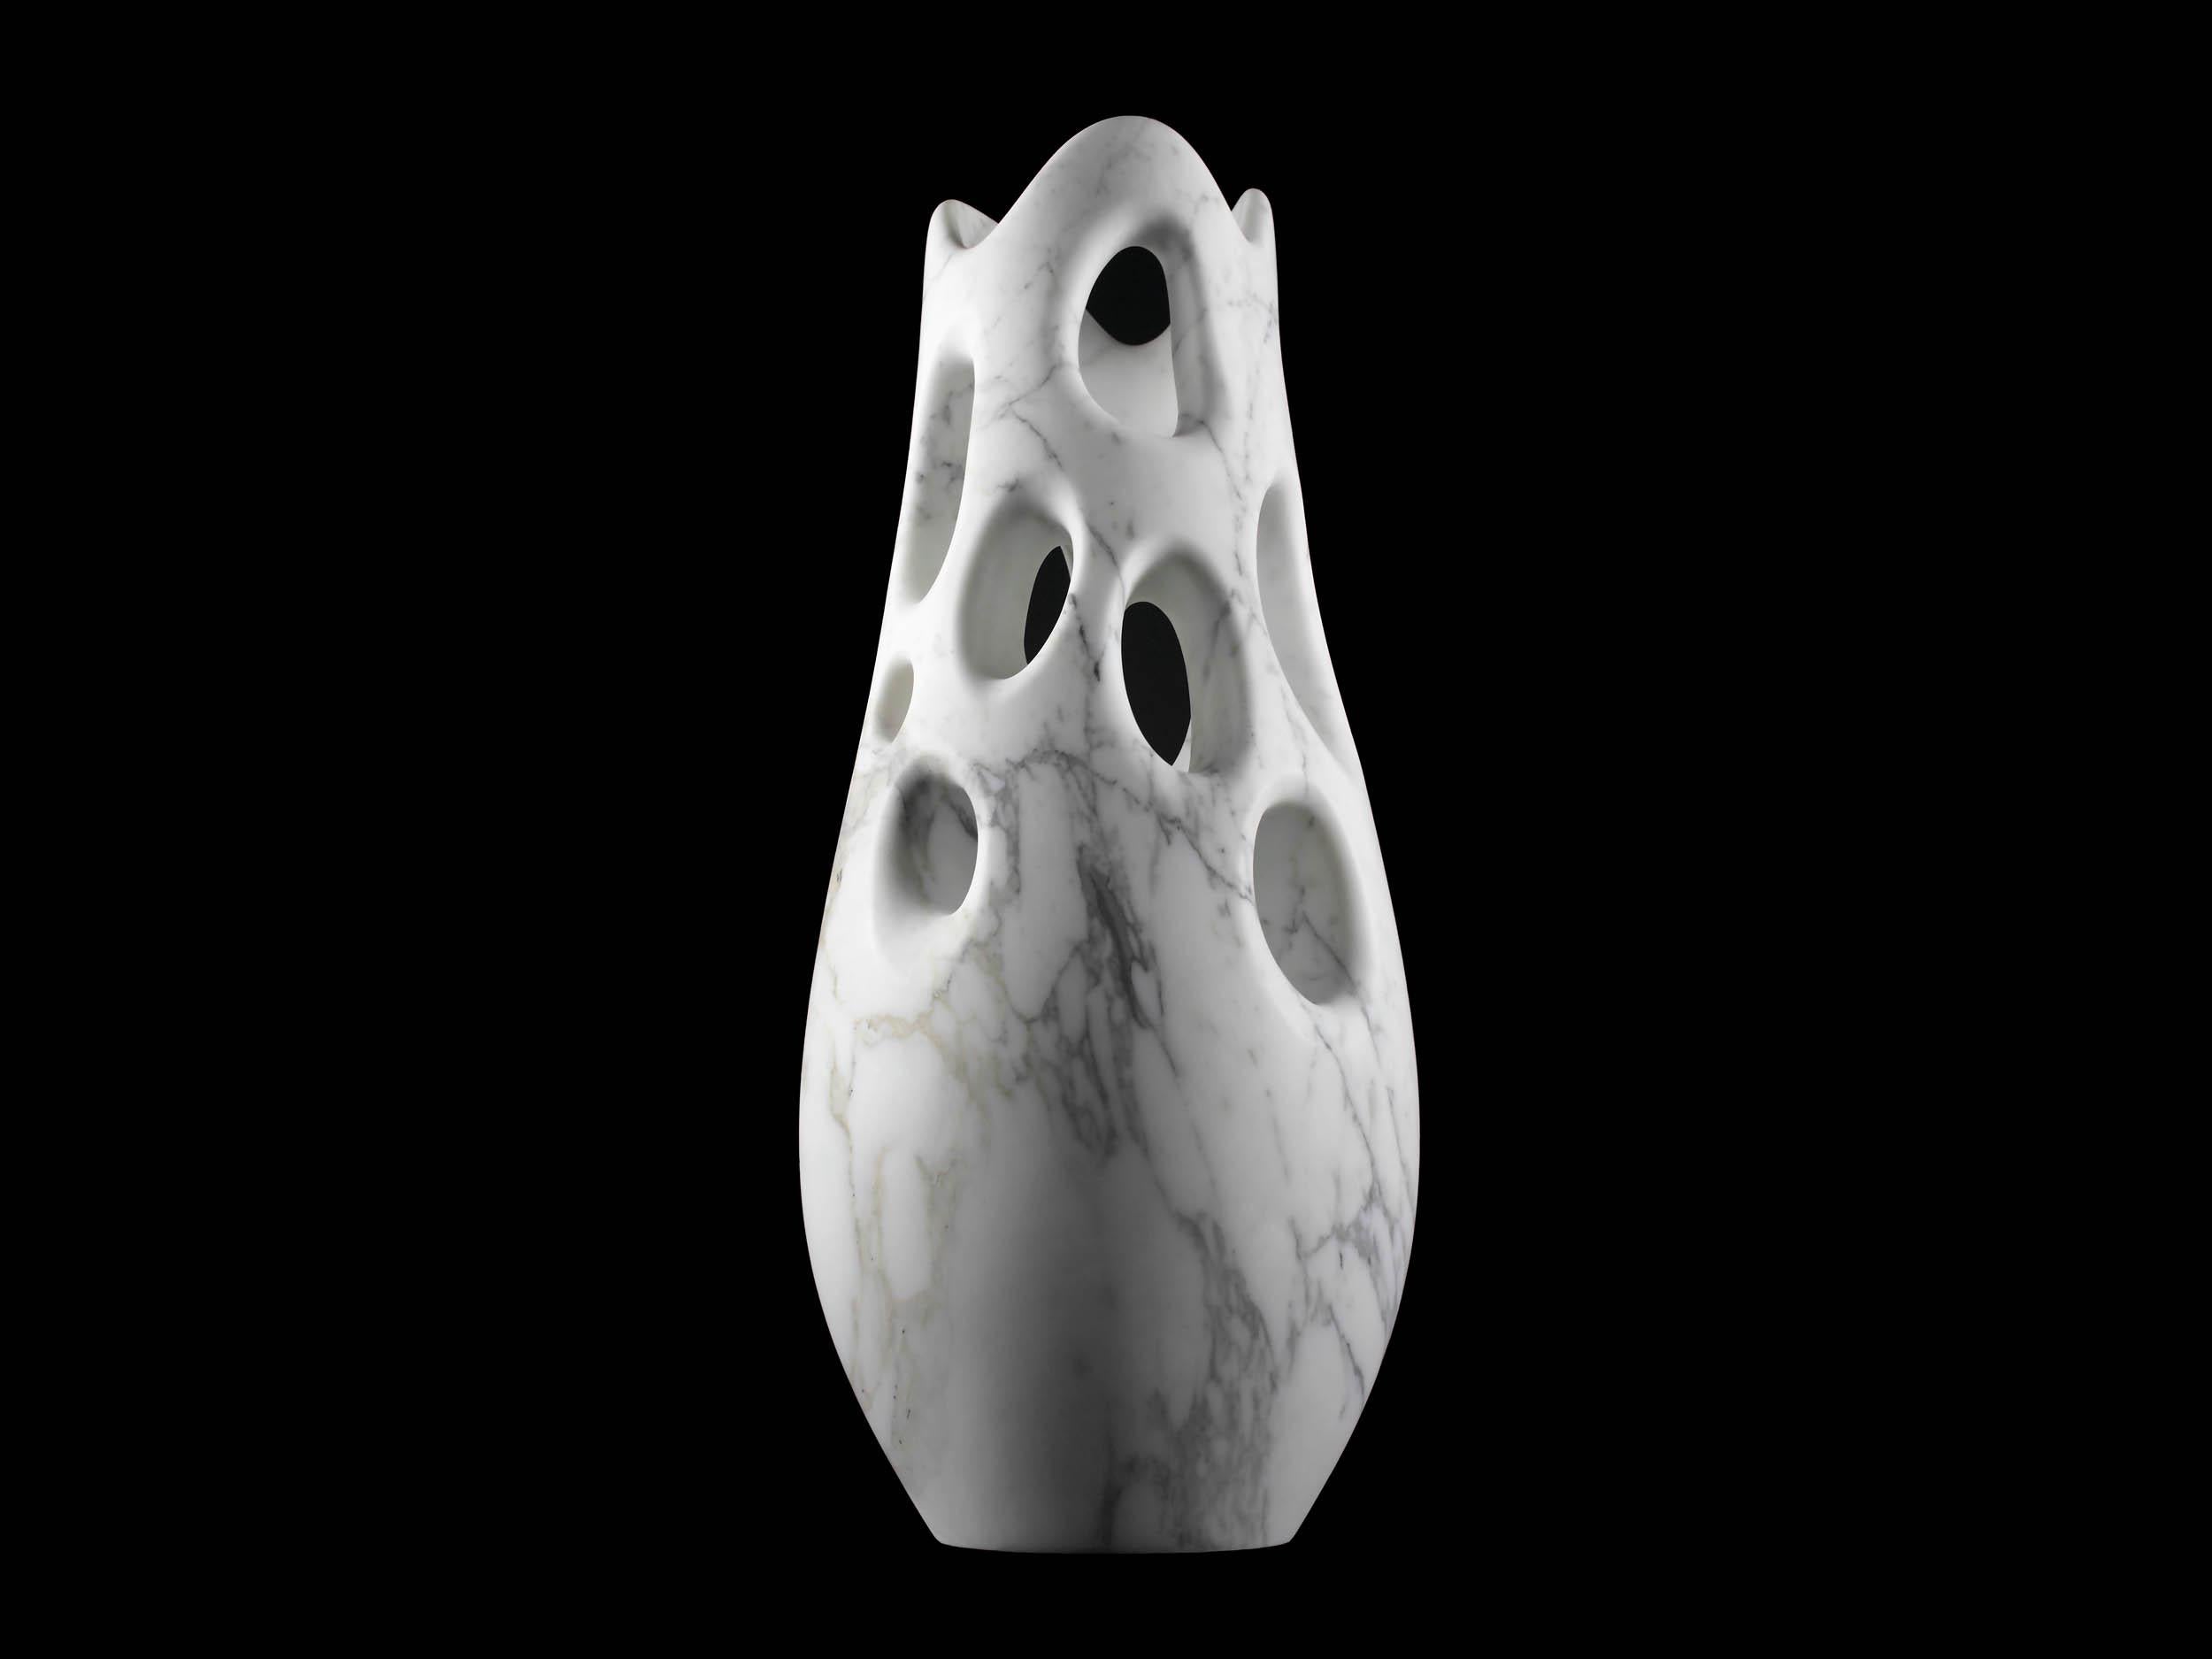 Vase Vessel Decorative Sculpture Organic Shape White Marble Hand-carved Italy In New Condition For Sale In Ancona, Marche